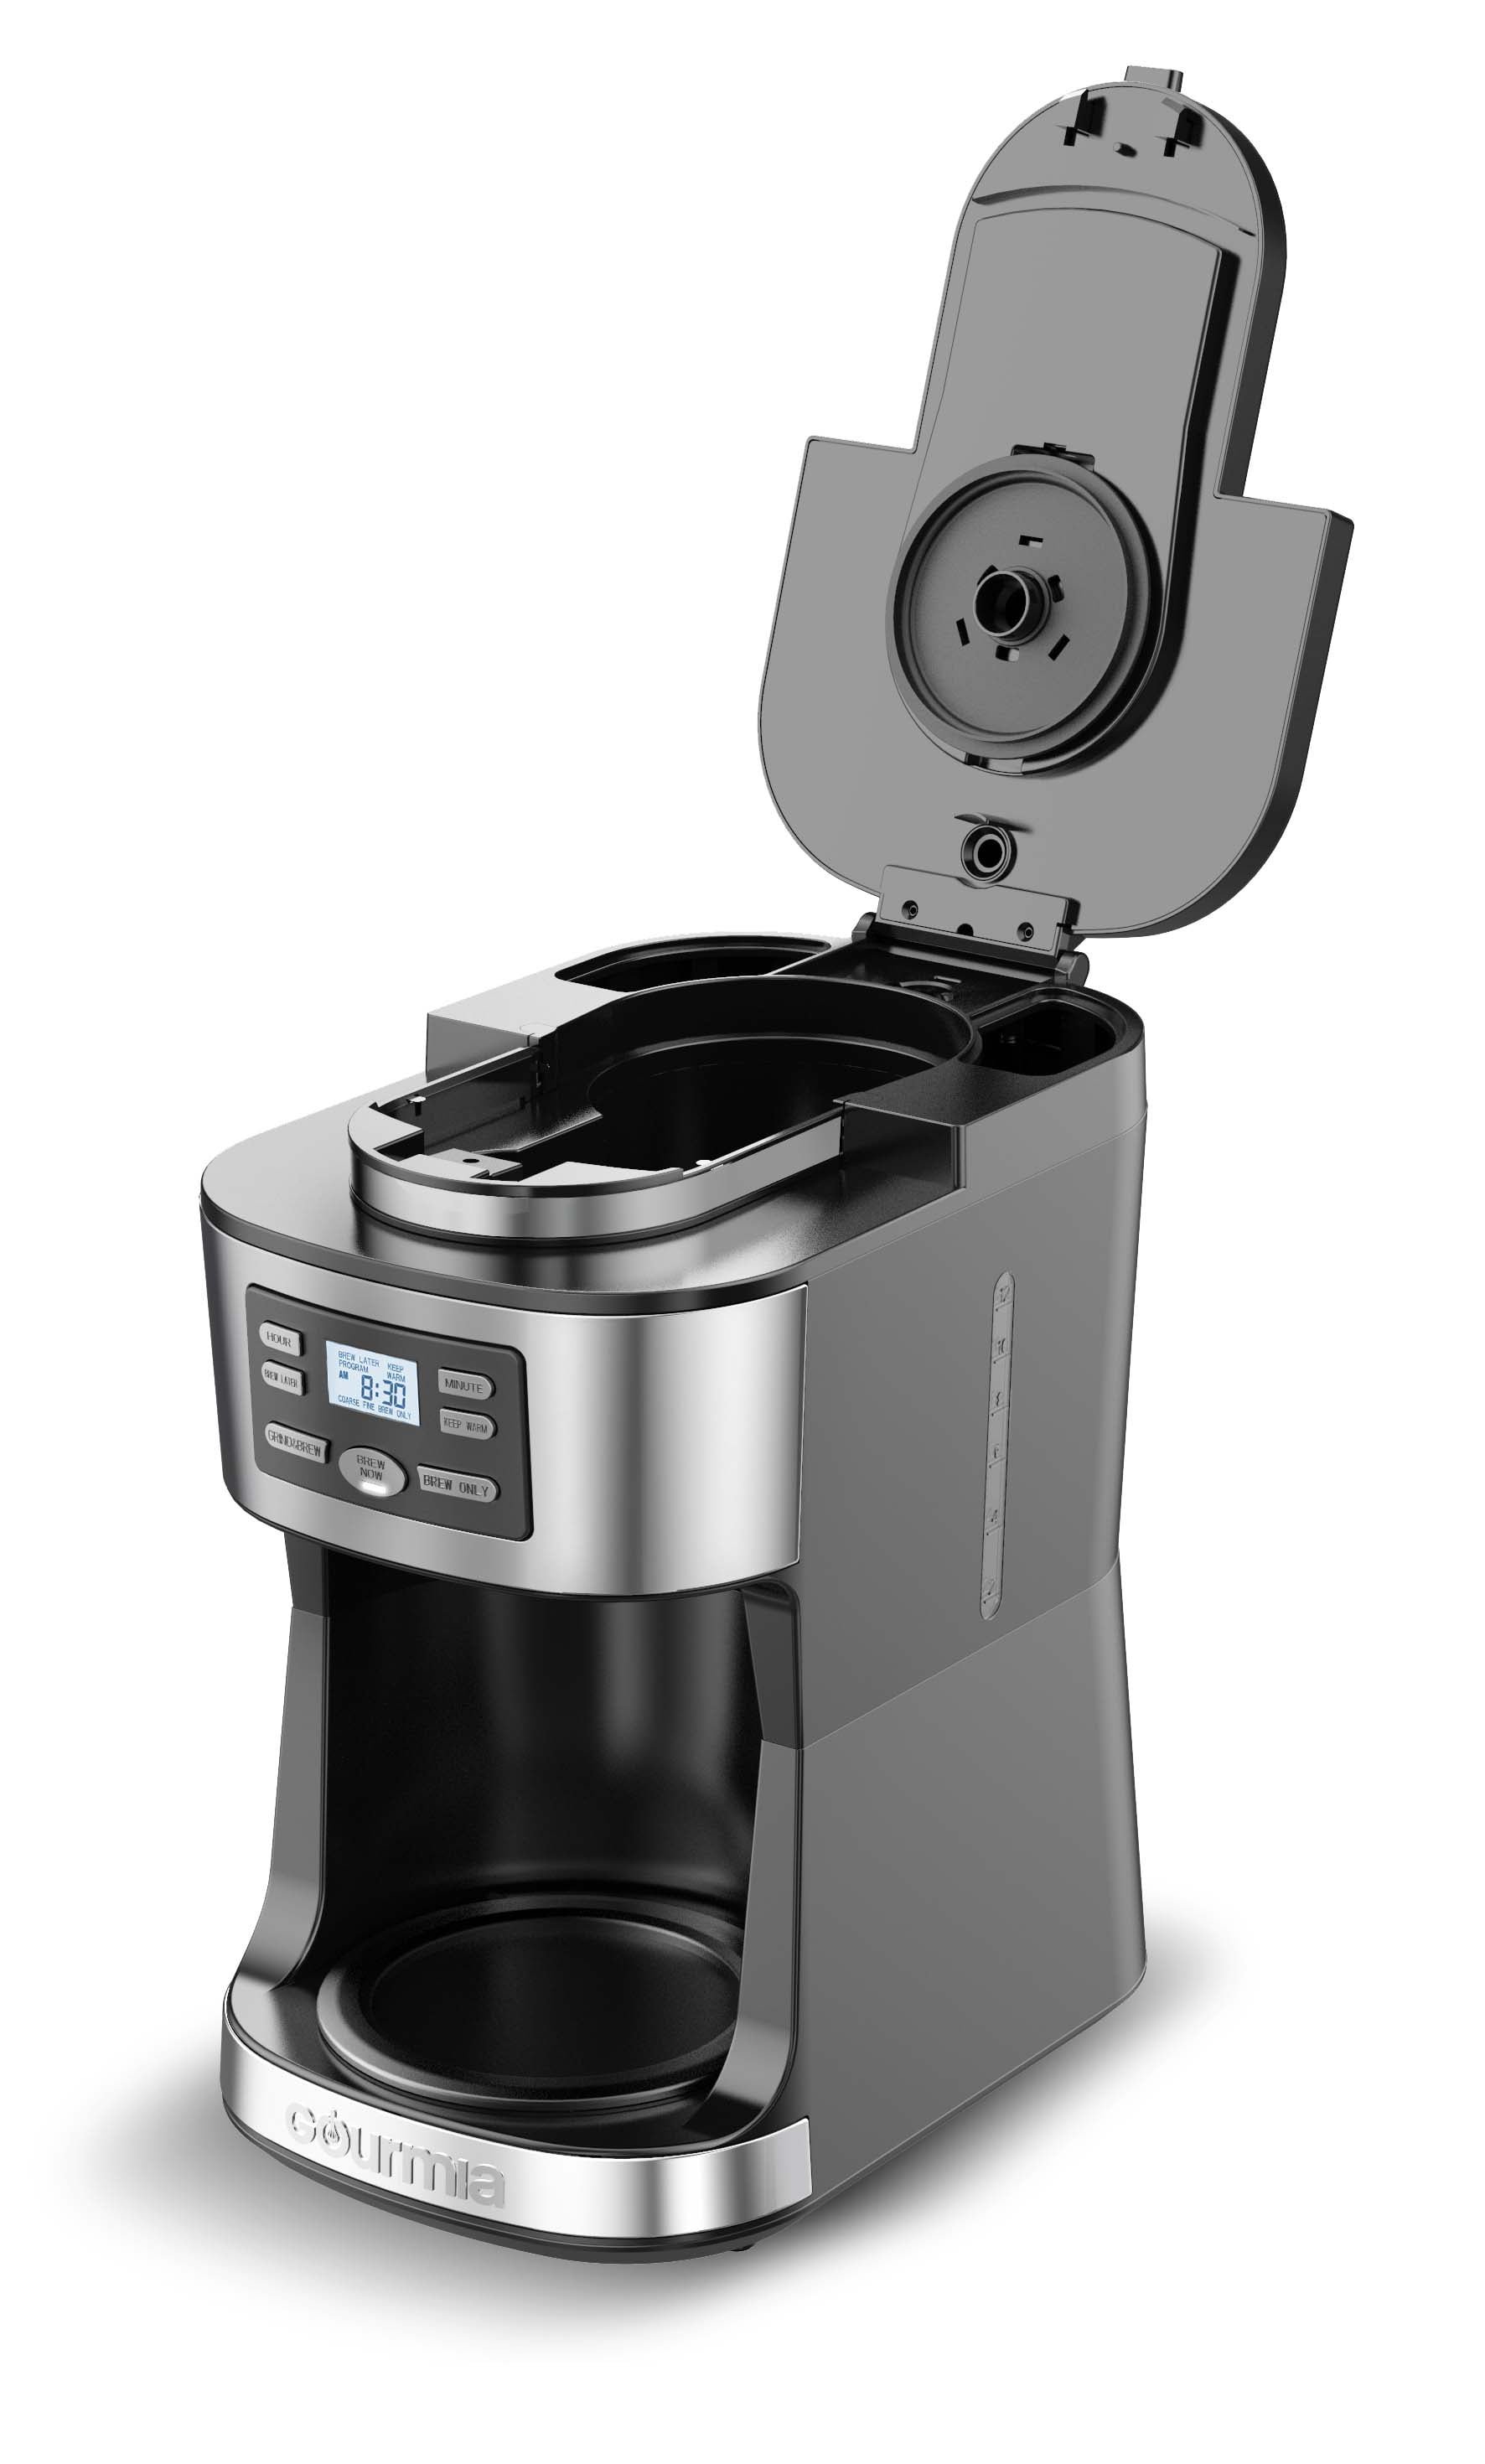 Gourmia 2-in-1 Single-Serve, K-Cup Pod Compatible + 12-Cup Coffee Maker, with Thermal Carafe